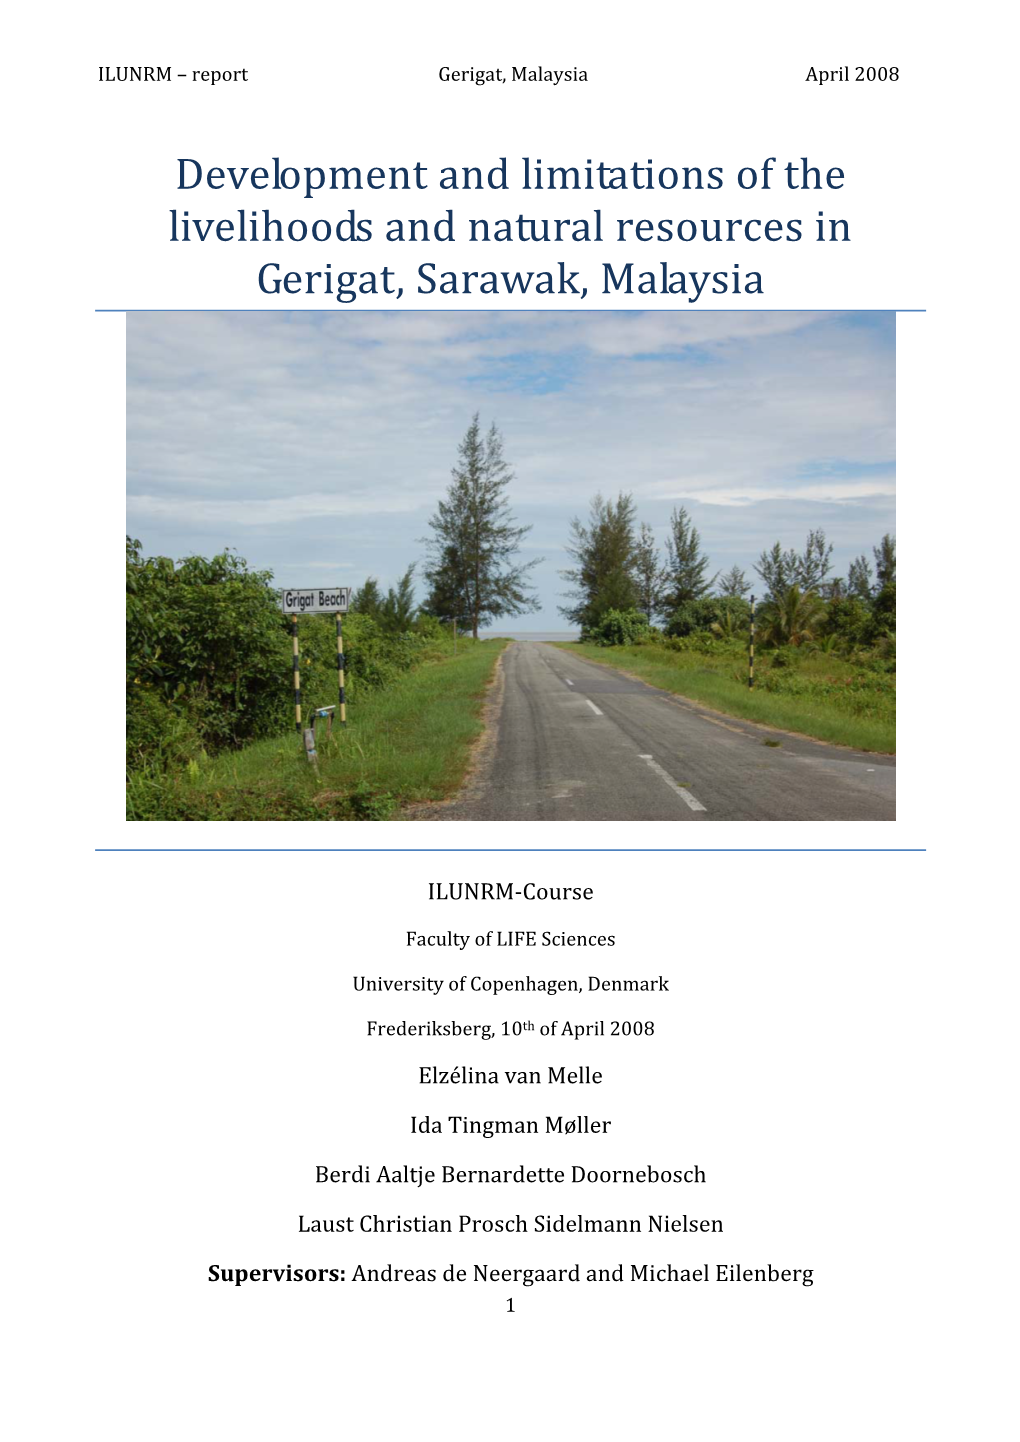 Development and Limitations of the Livelihoods and Natural Resources in Gerigat, Sarawak, Malaysia